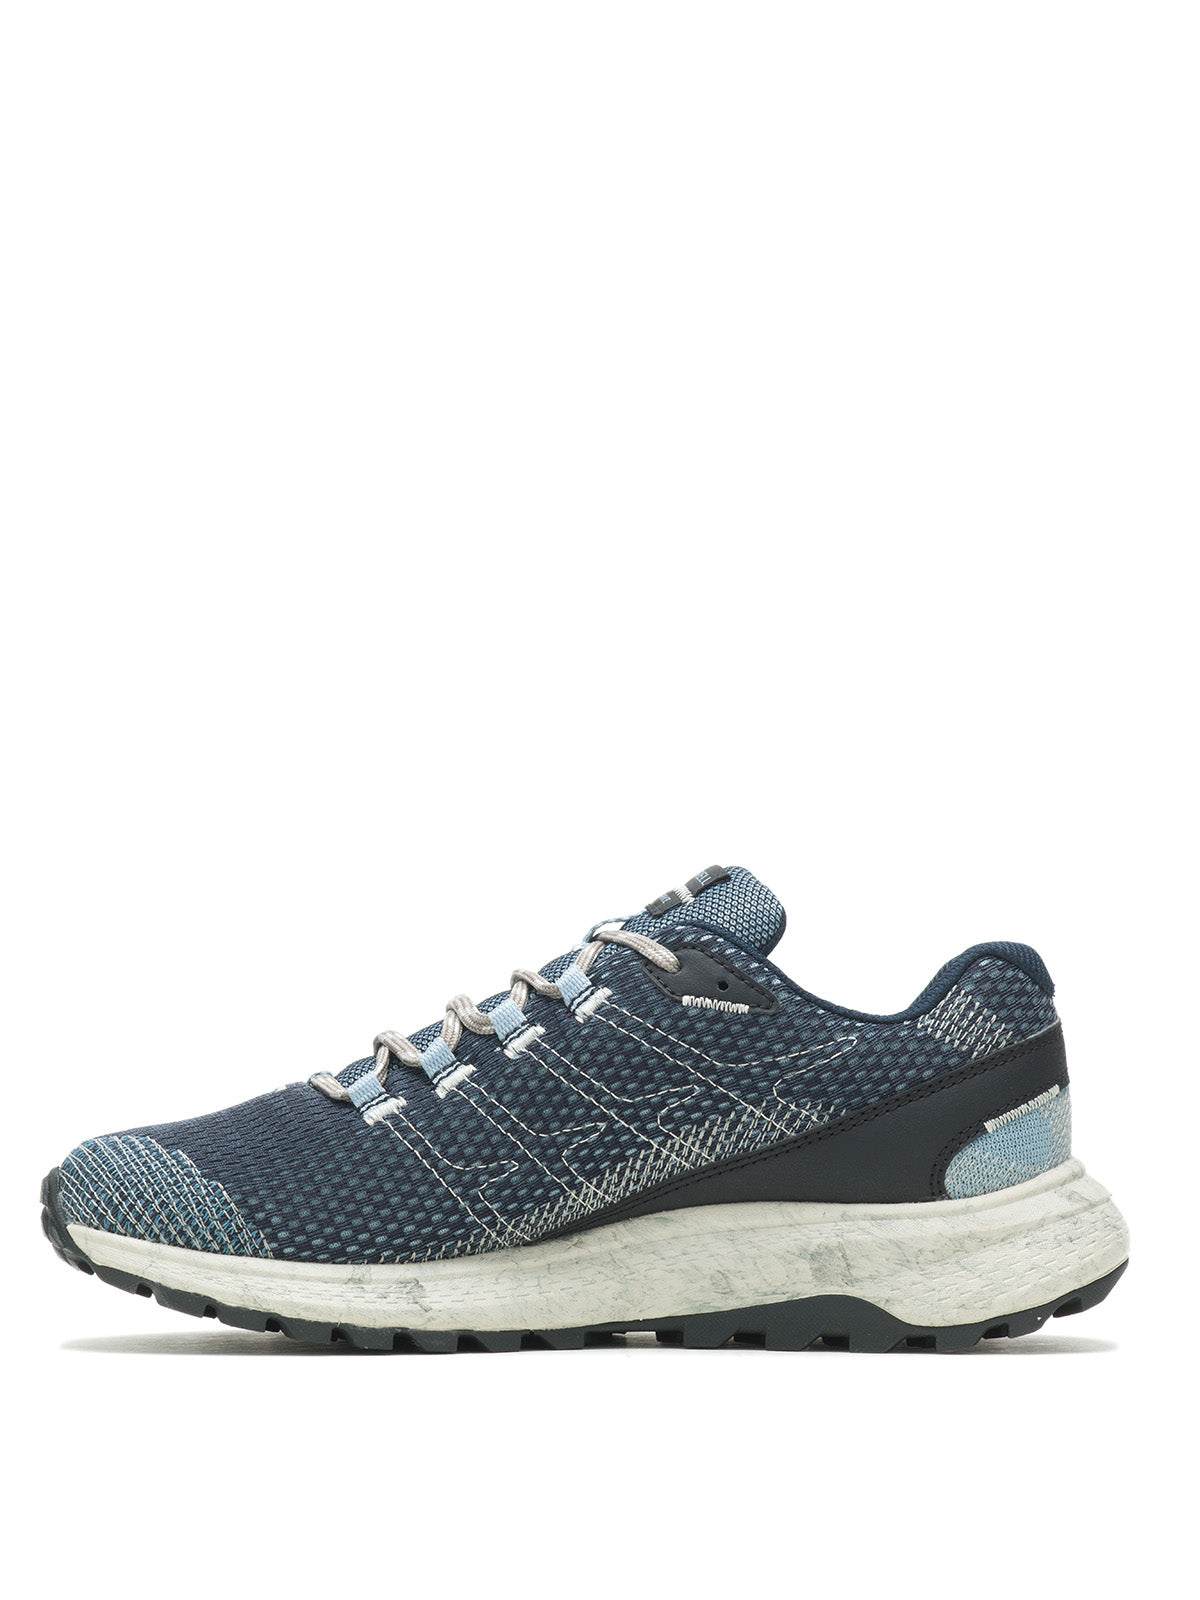 Chaussures pour femme Fly-Strike GORE-TEX